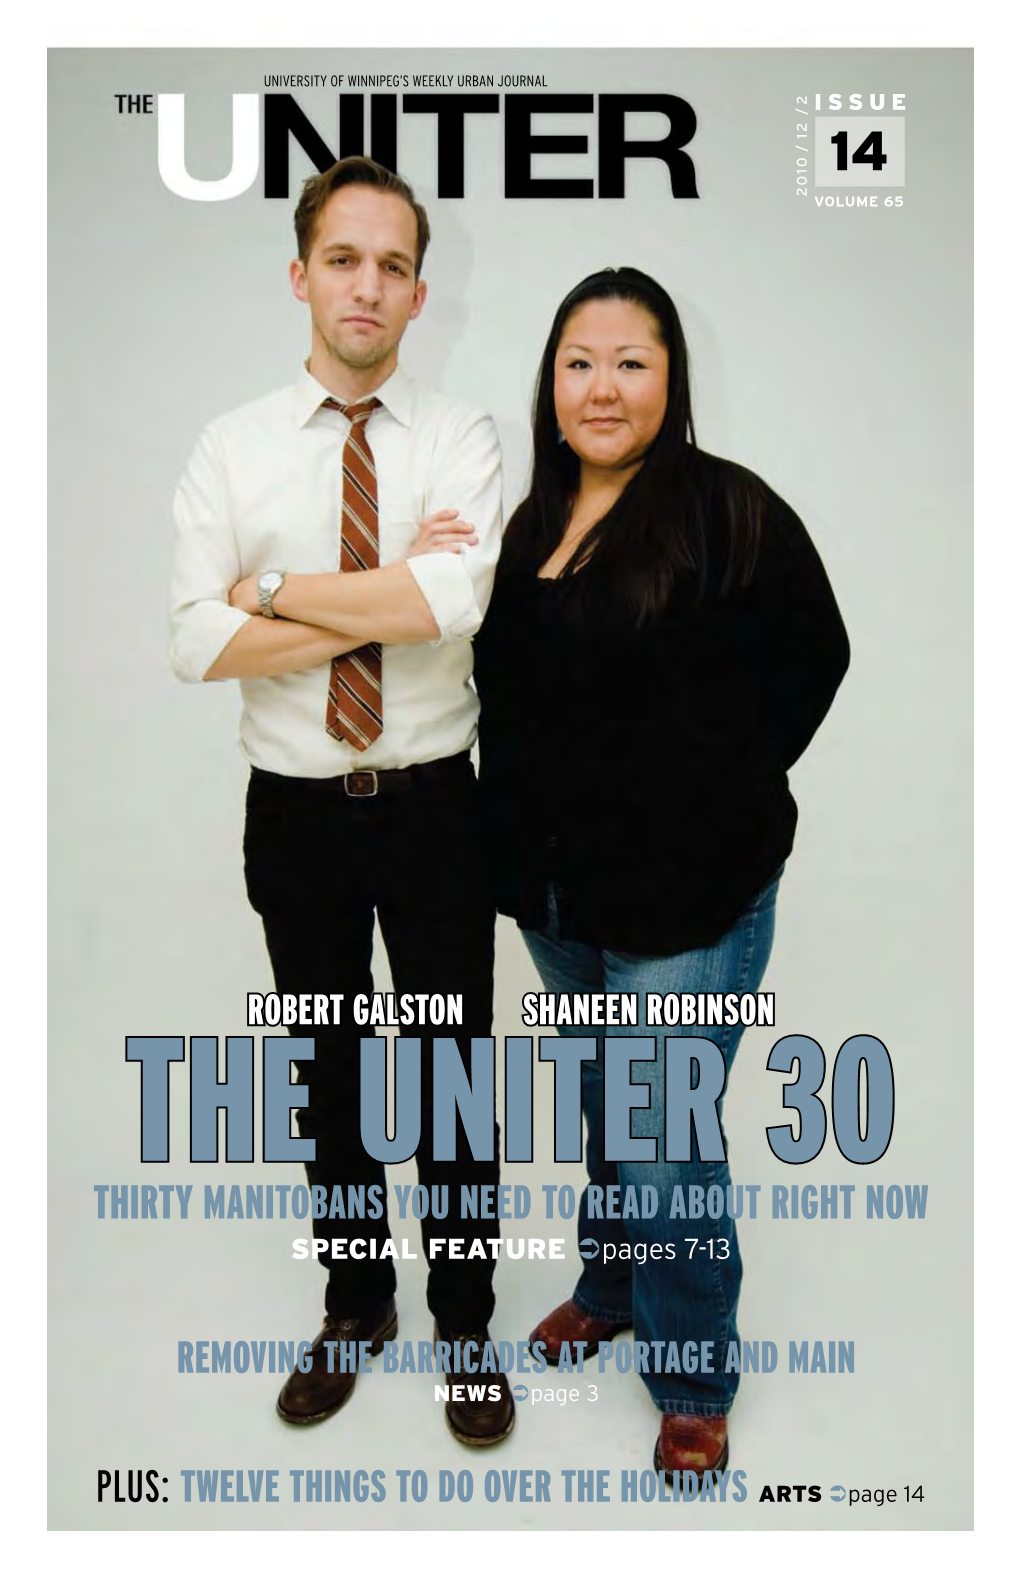 Thirty Manitobans You Need to Read About Right Now SPECIAL FEATURE Pages 7-13